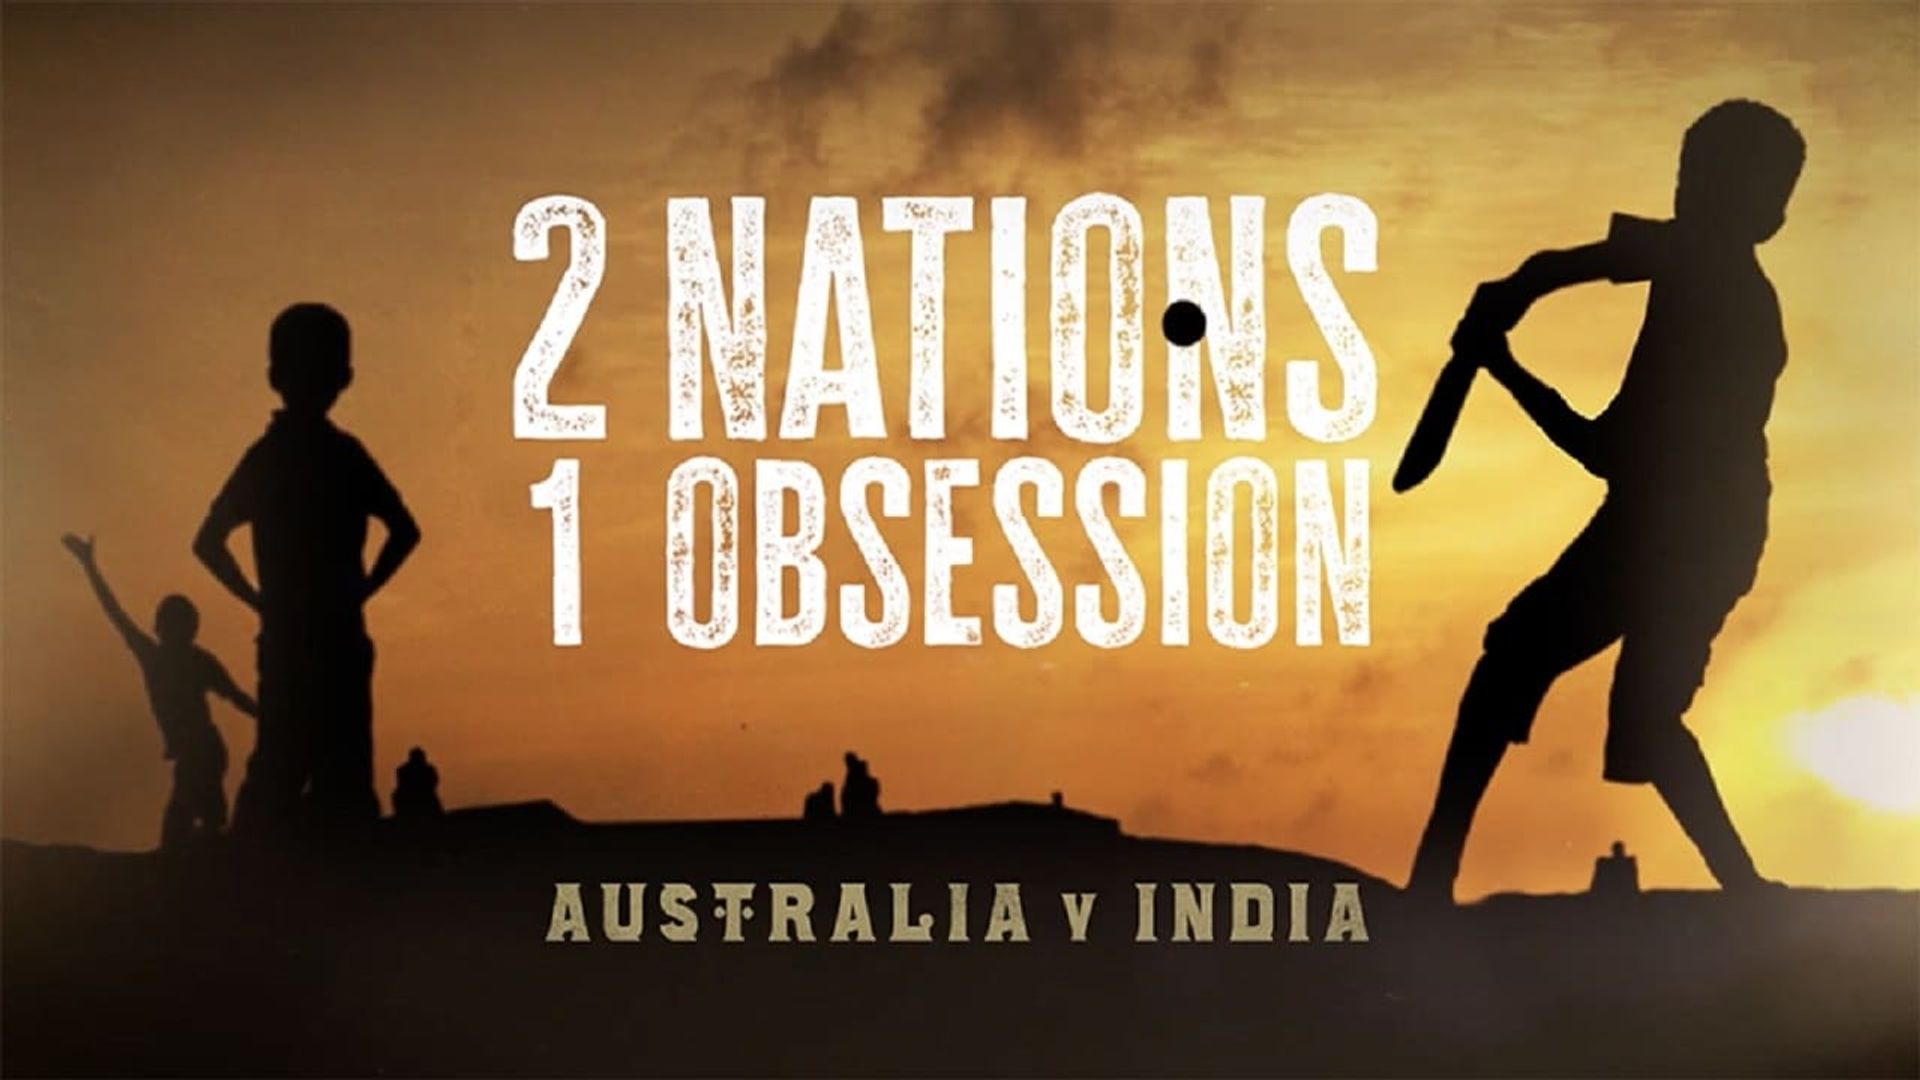 2 Nations, 1 Obsession background